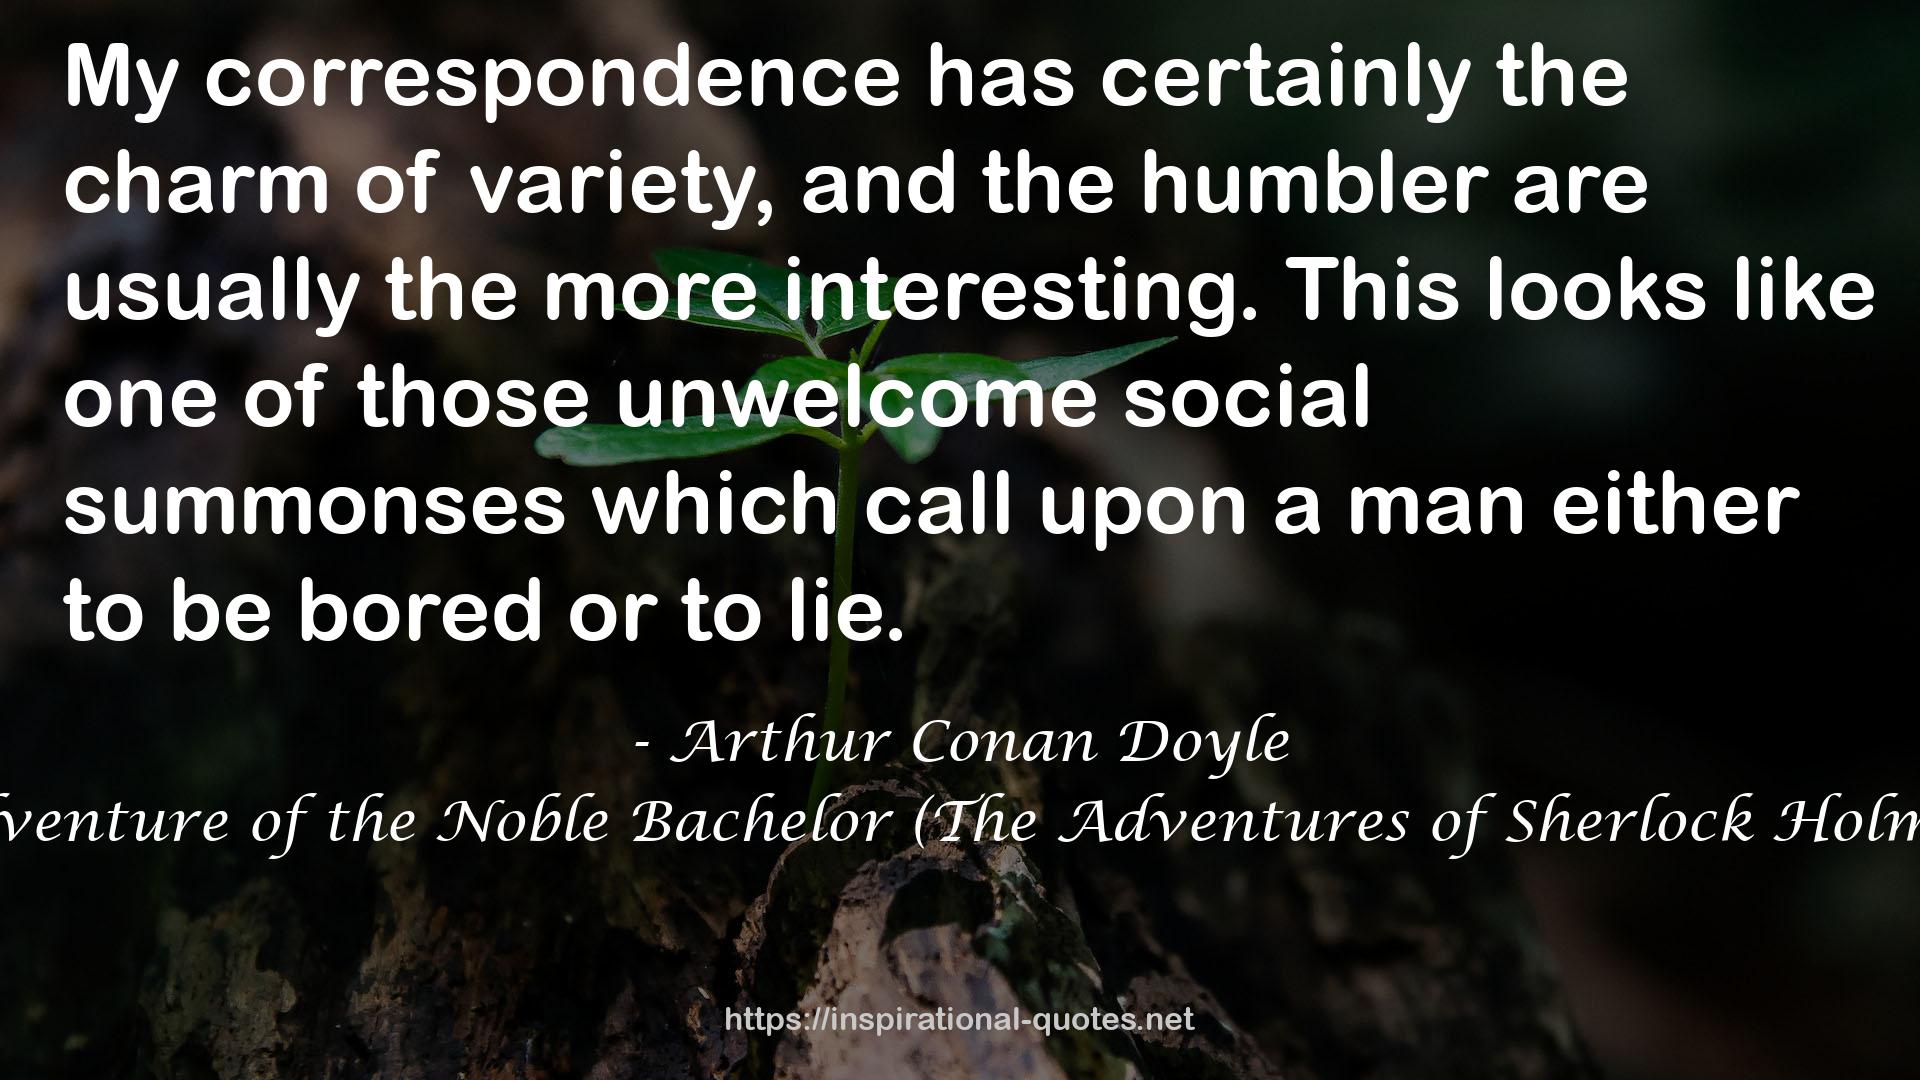 The Adventure of the Noble Bachelor (The Adventures of Sherlock Holmes, #10) QUOTES